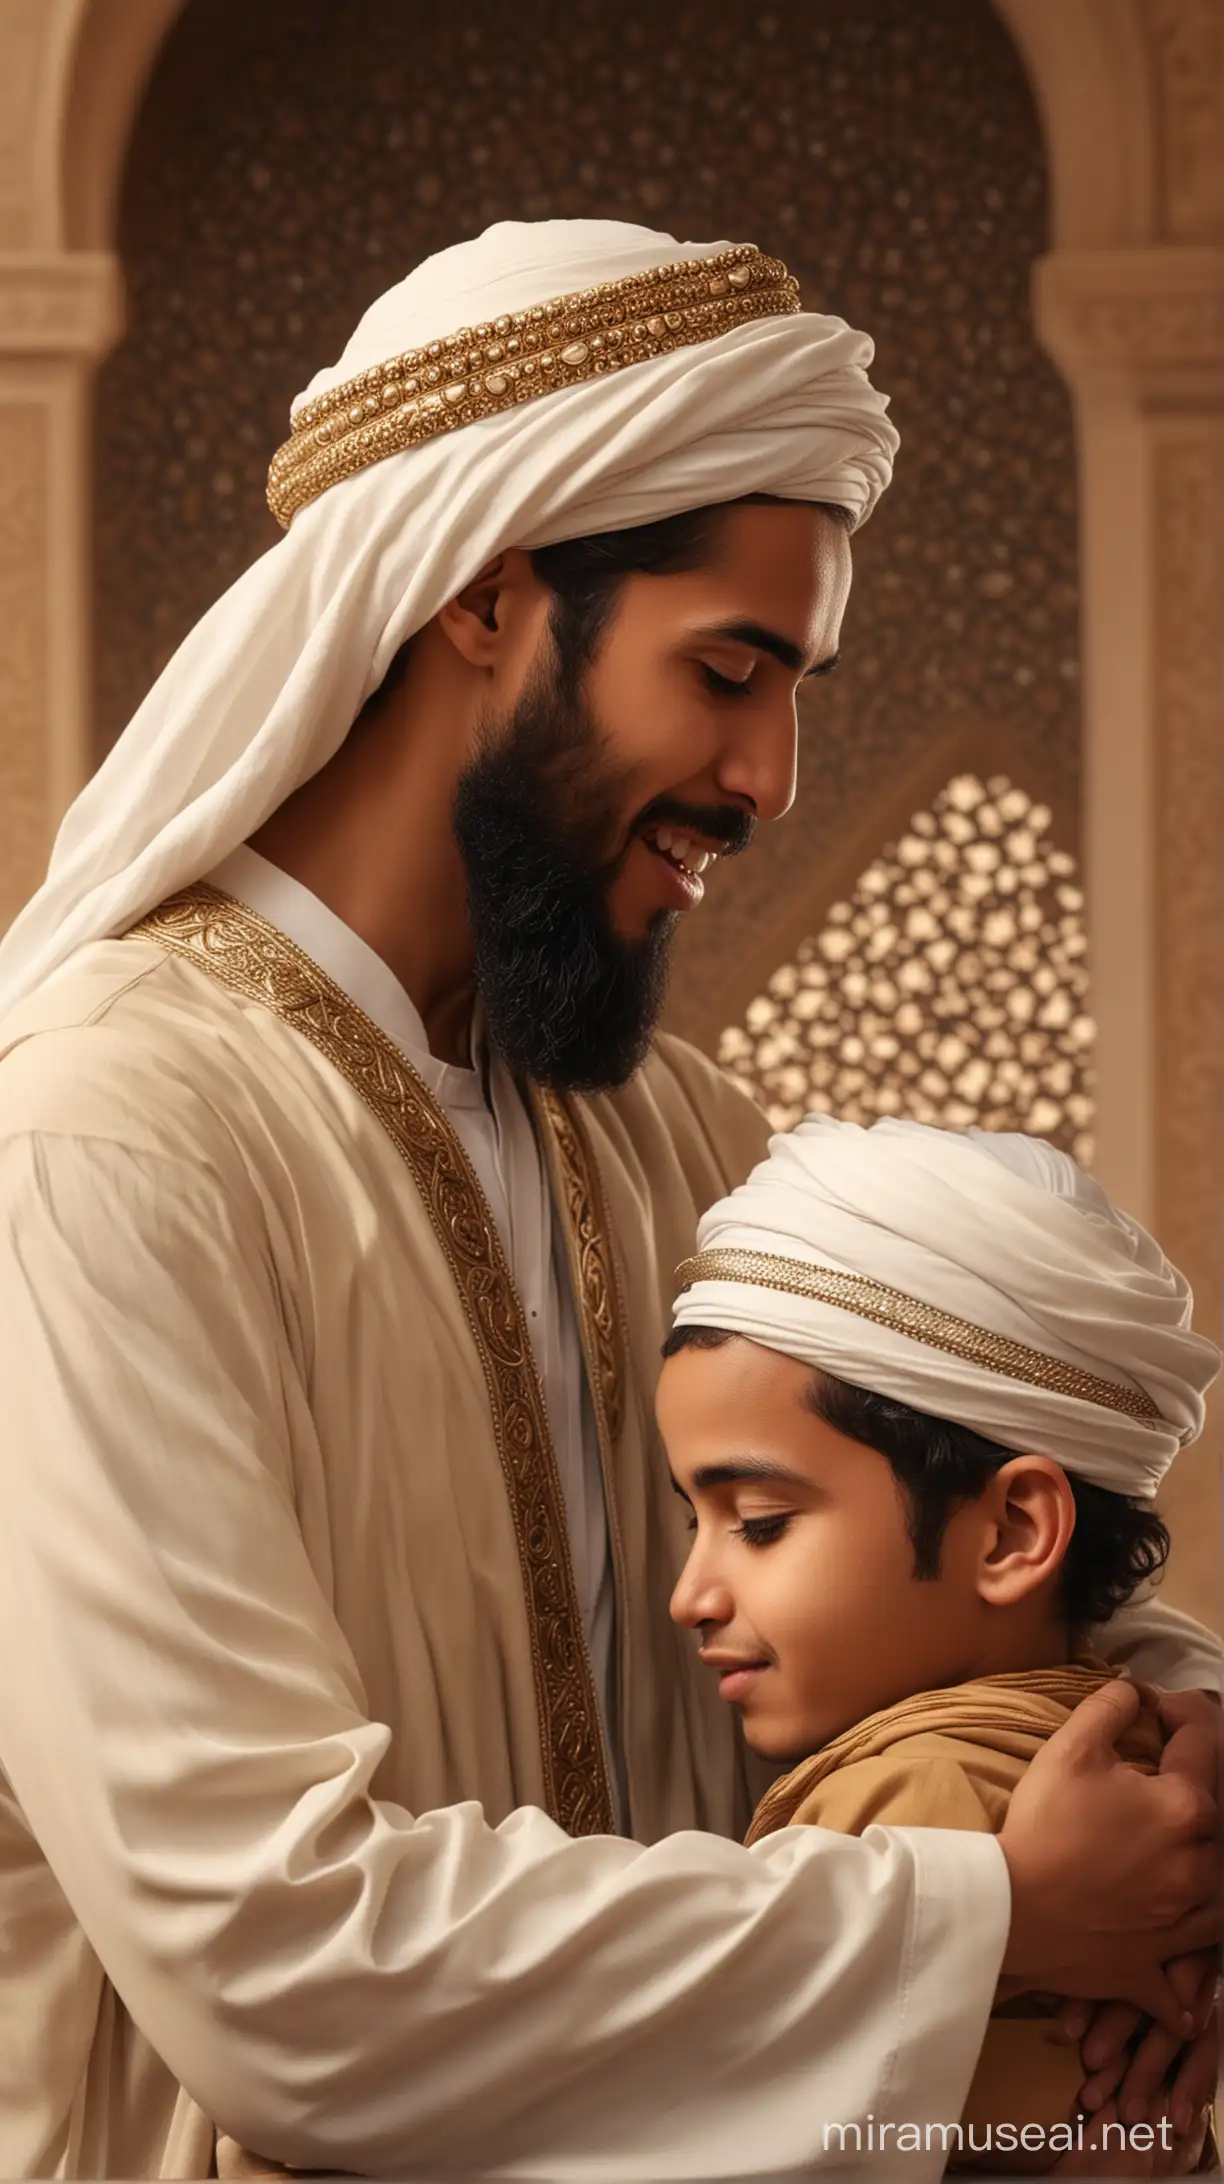 Subject: Prophet Muhammad embracing Zayd ibn Harithah as his son, symbolizing their bond and the breaking of social barriers.
Style: Warm and inviting, with a focus on the emotions of joy and acceptance., islamic tradition and HD , 4K ,backgound must be islamic